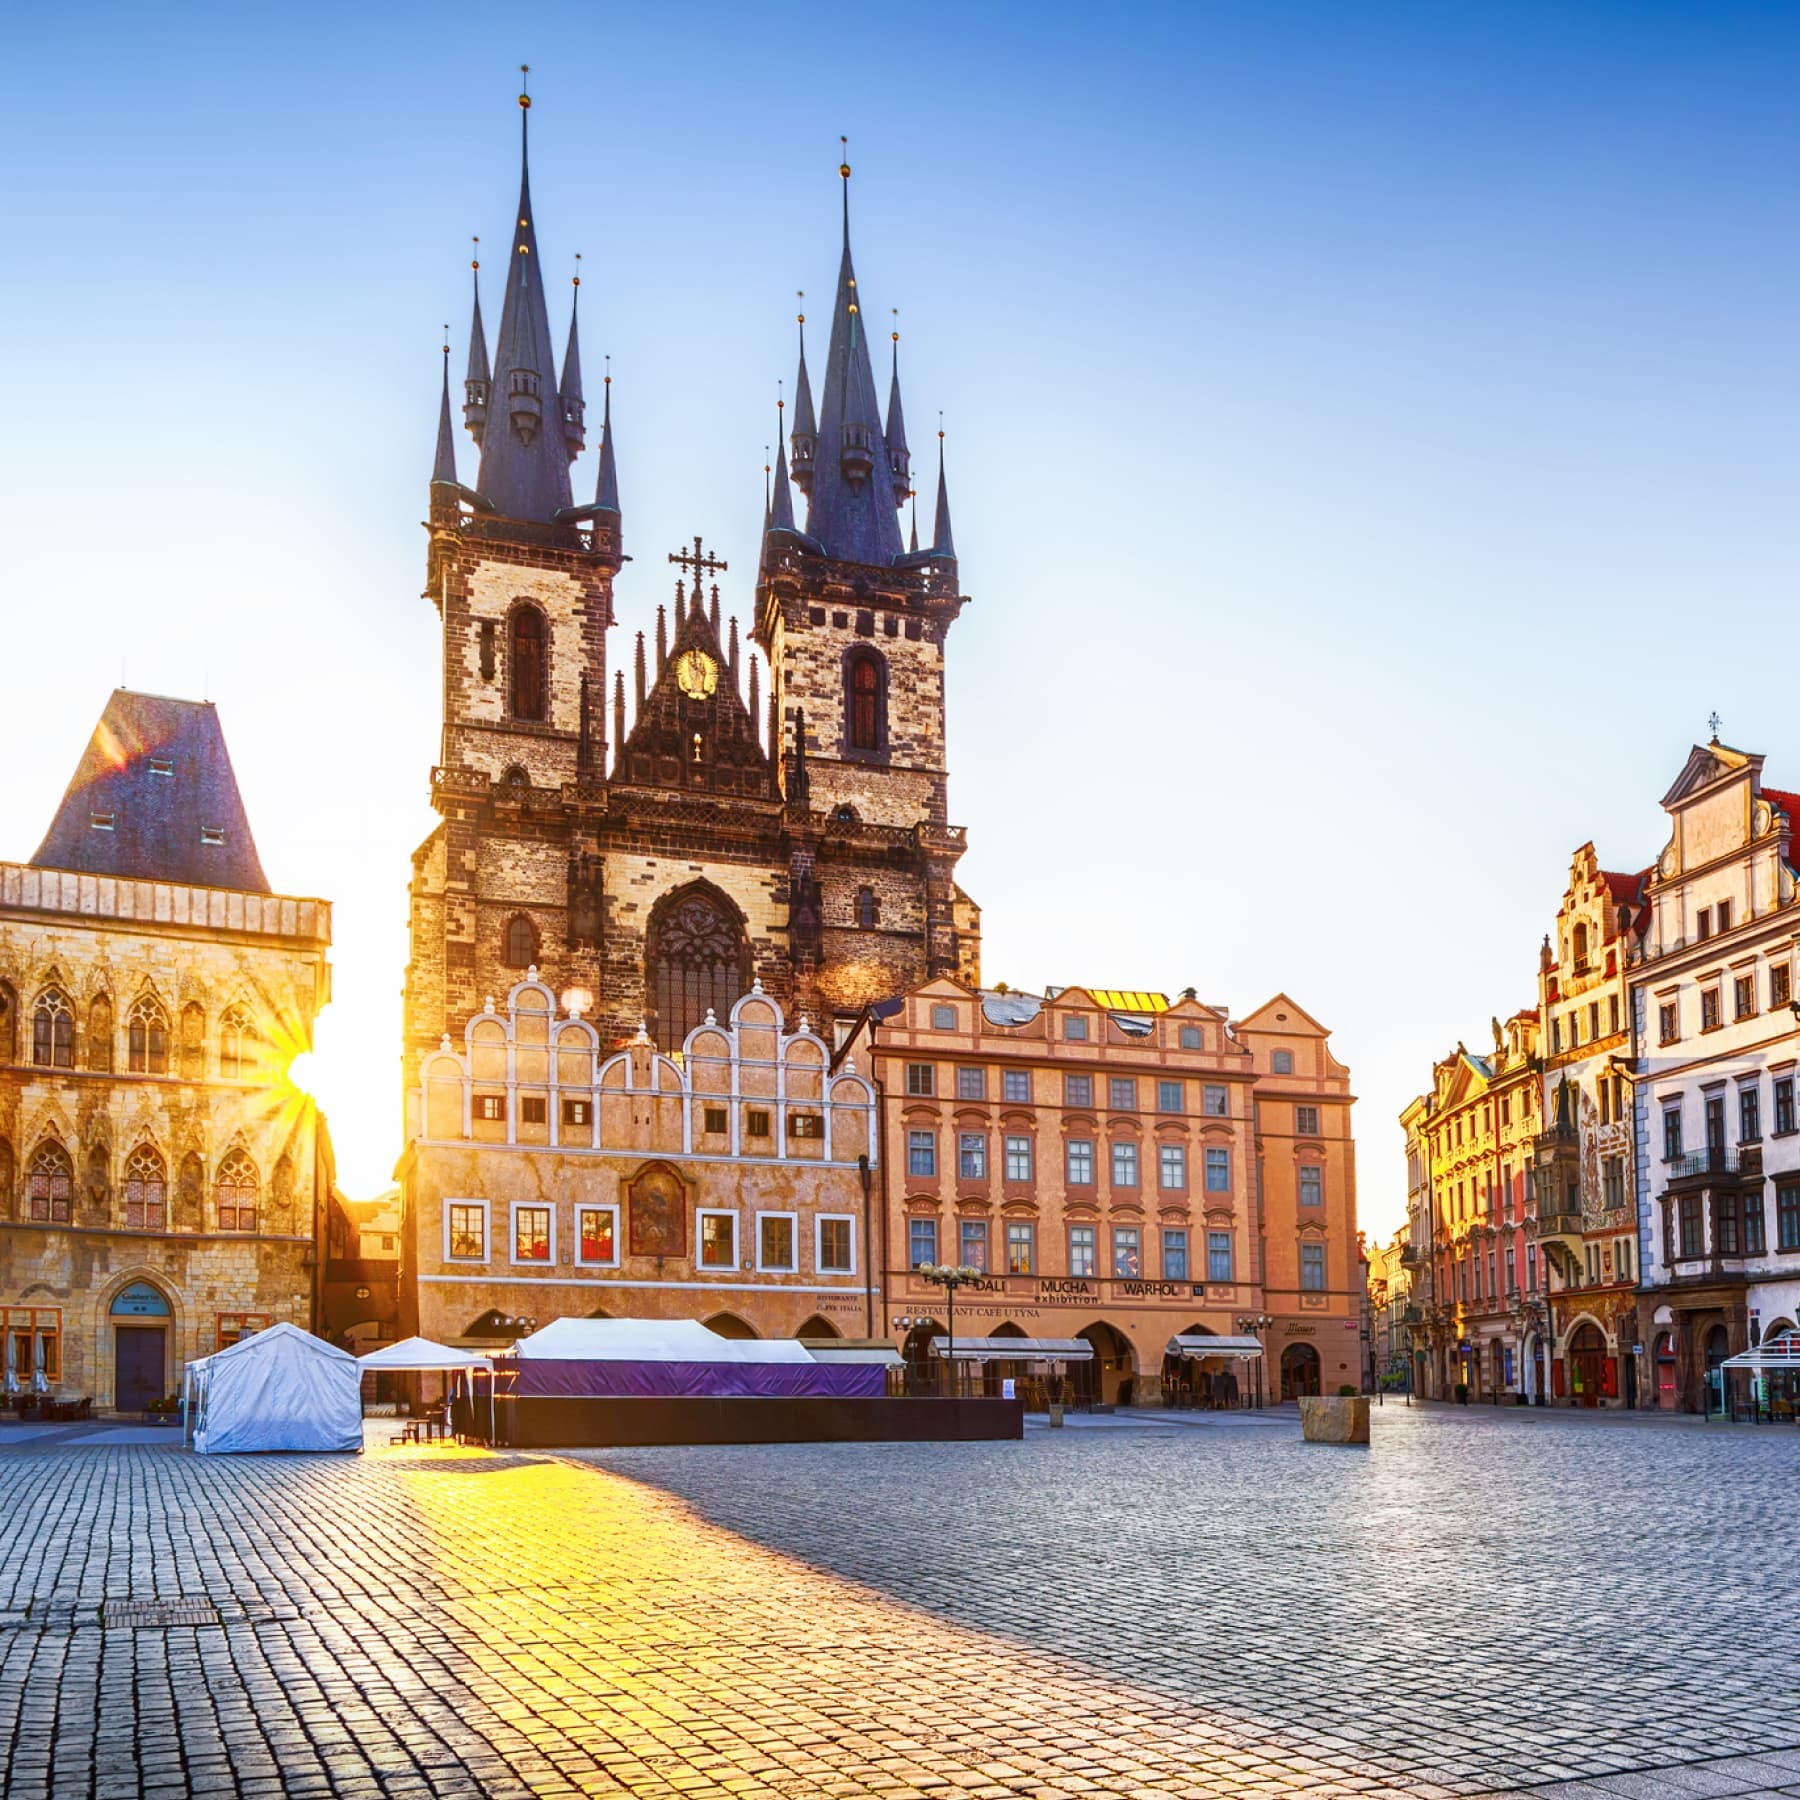 For romantic city breaks, what could be more stunning than Prague